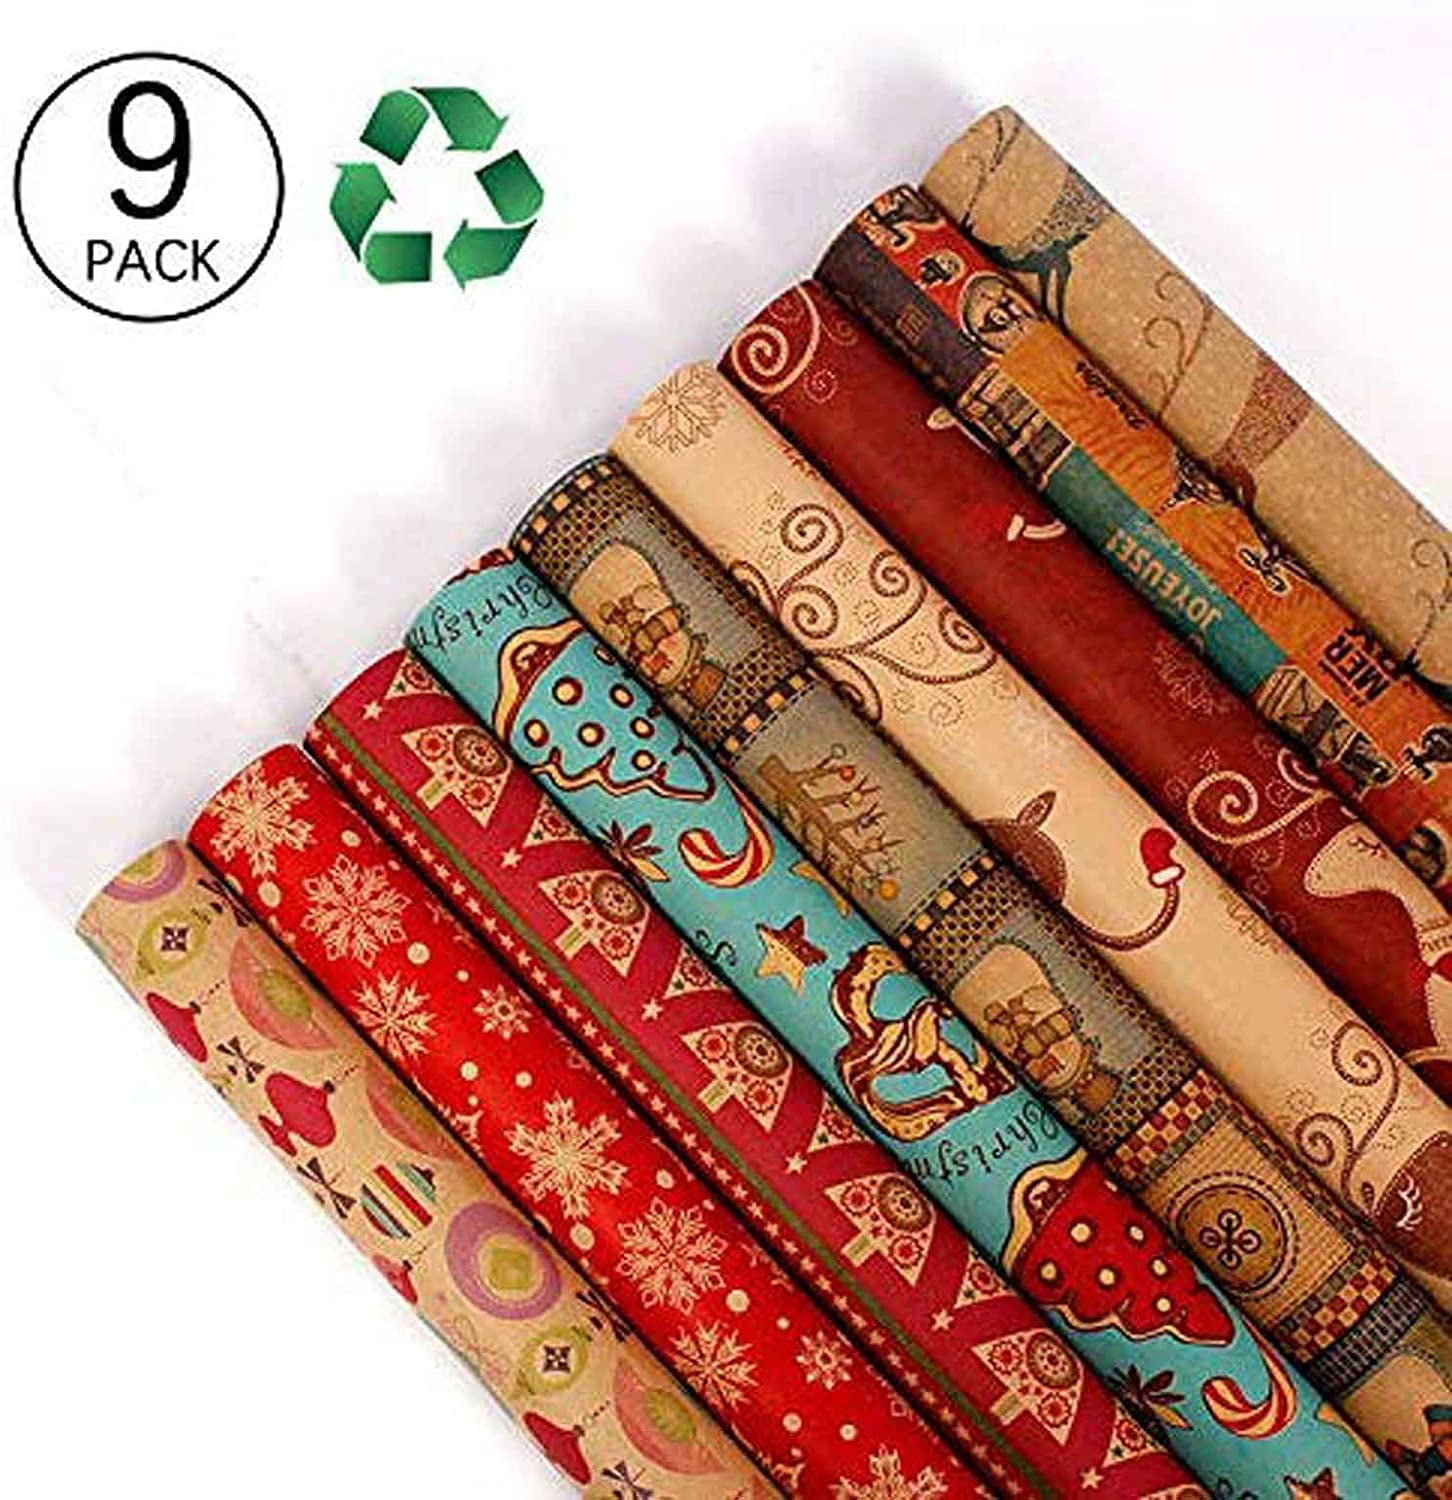  Zayvor 12 Large Sheets Christmas Wrapping Paper,Assorted Brown  Kraft Folded Holiday Gift Wrap,Recyclable Xmas Wrap Paper, Festive  Traditional Christmas Decorations,Snowflake, Christmas Tree,70x50cm :  Health & Household